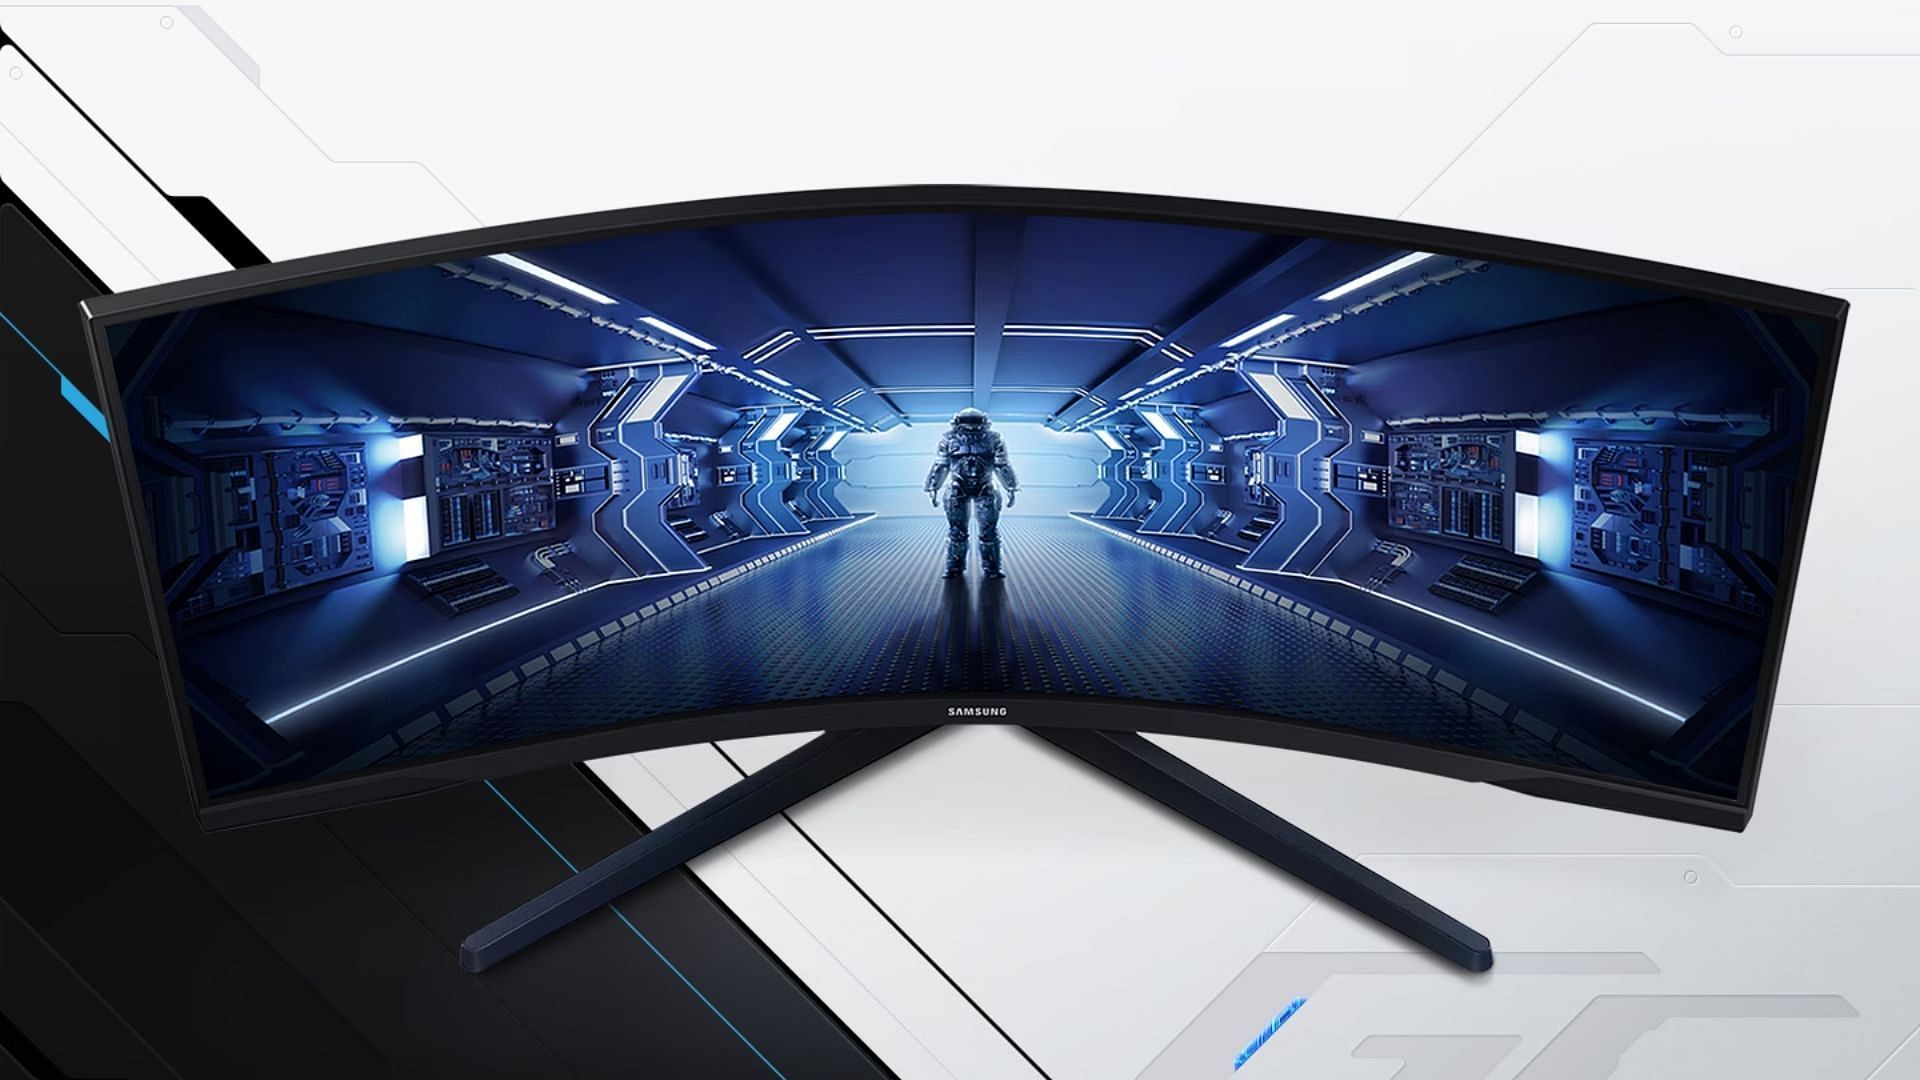 Curved monitors are expensive but are they better than flat monitors? (Image via Samsung)